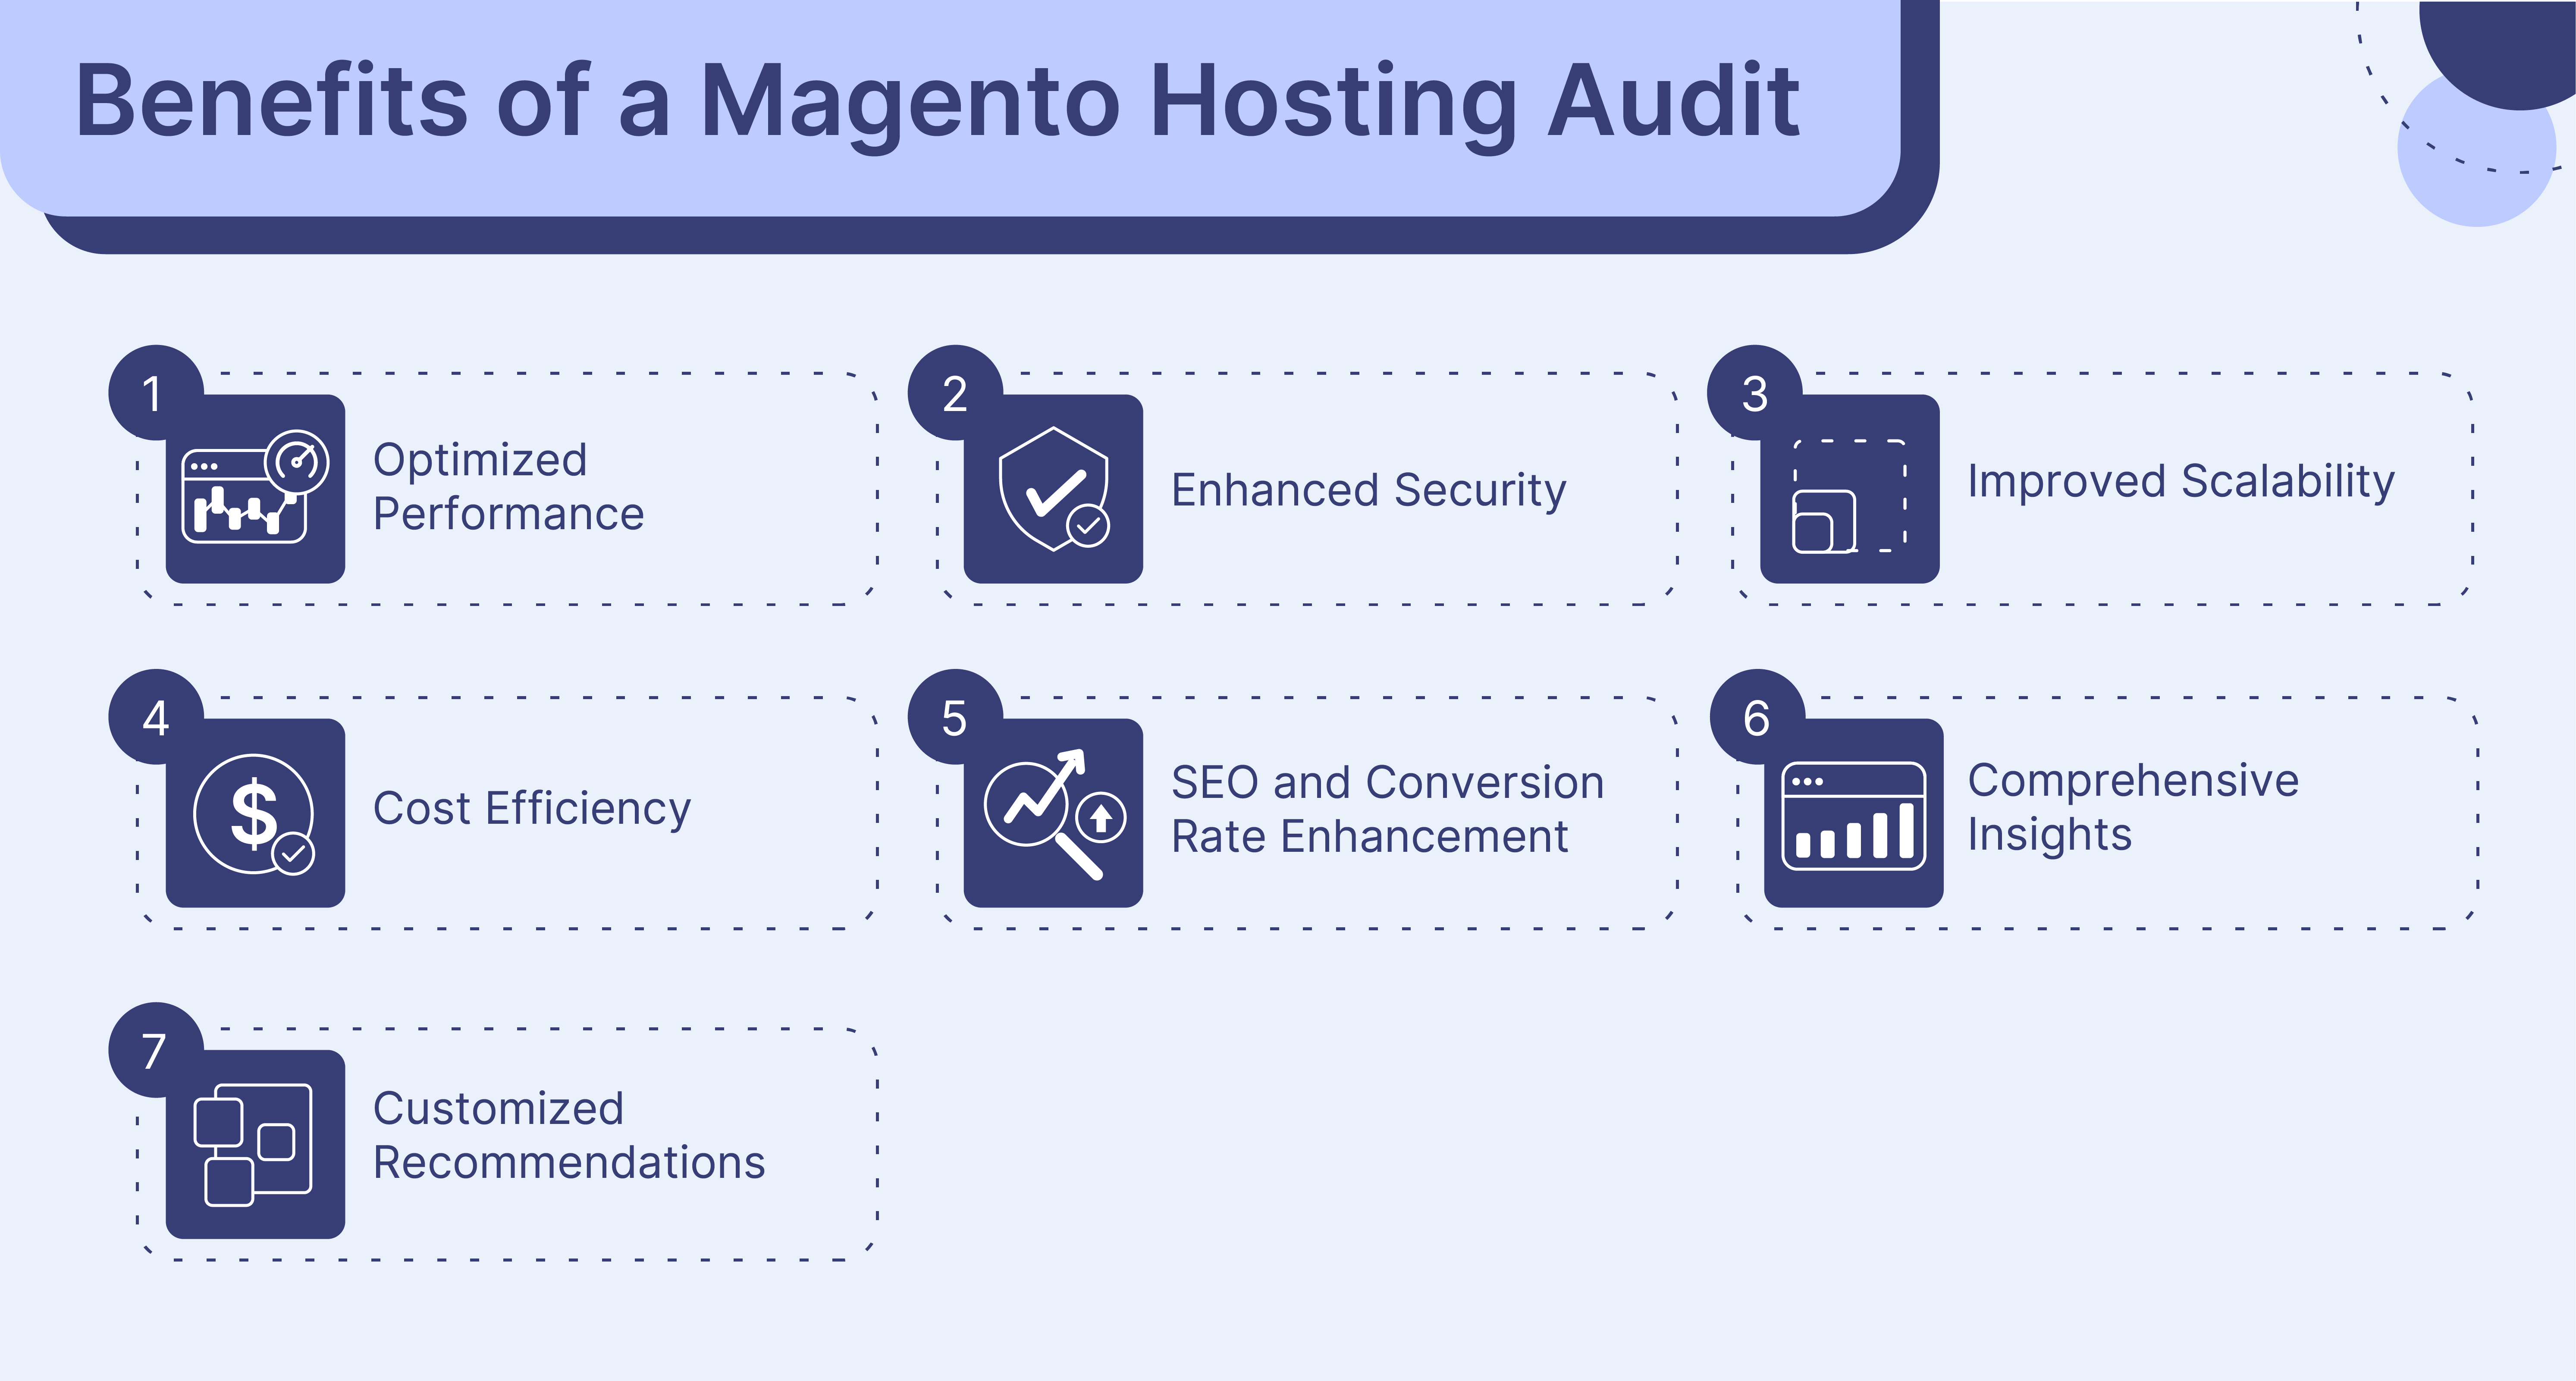 Key advantages of conducting a Magento Hosting Audit for ecommerce optimization